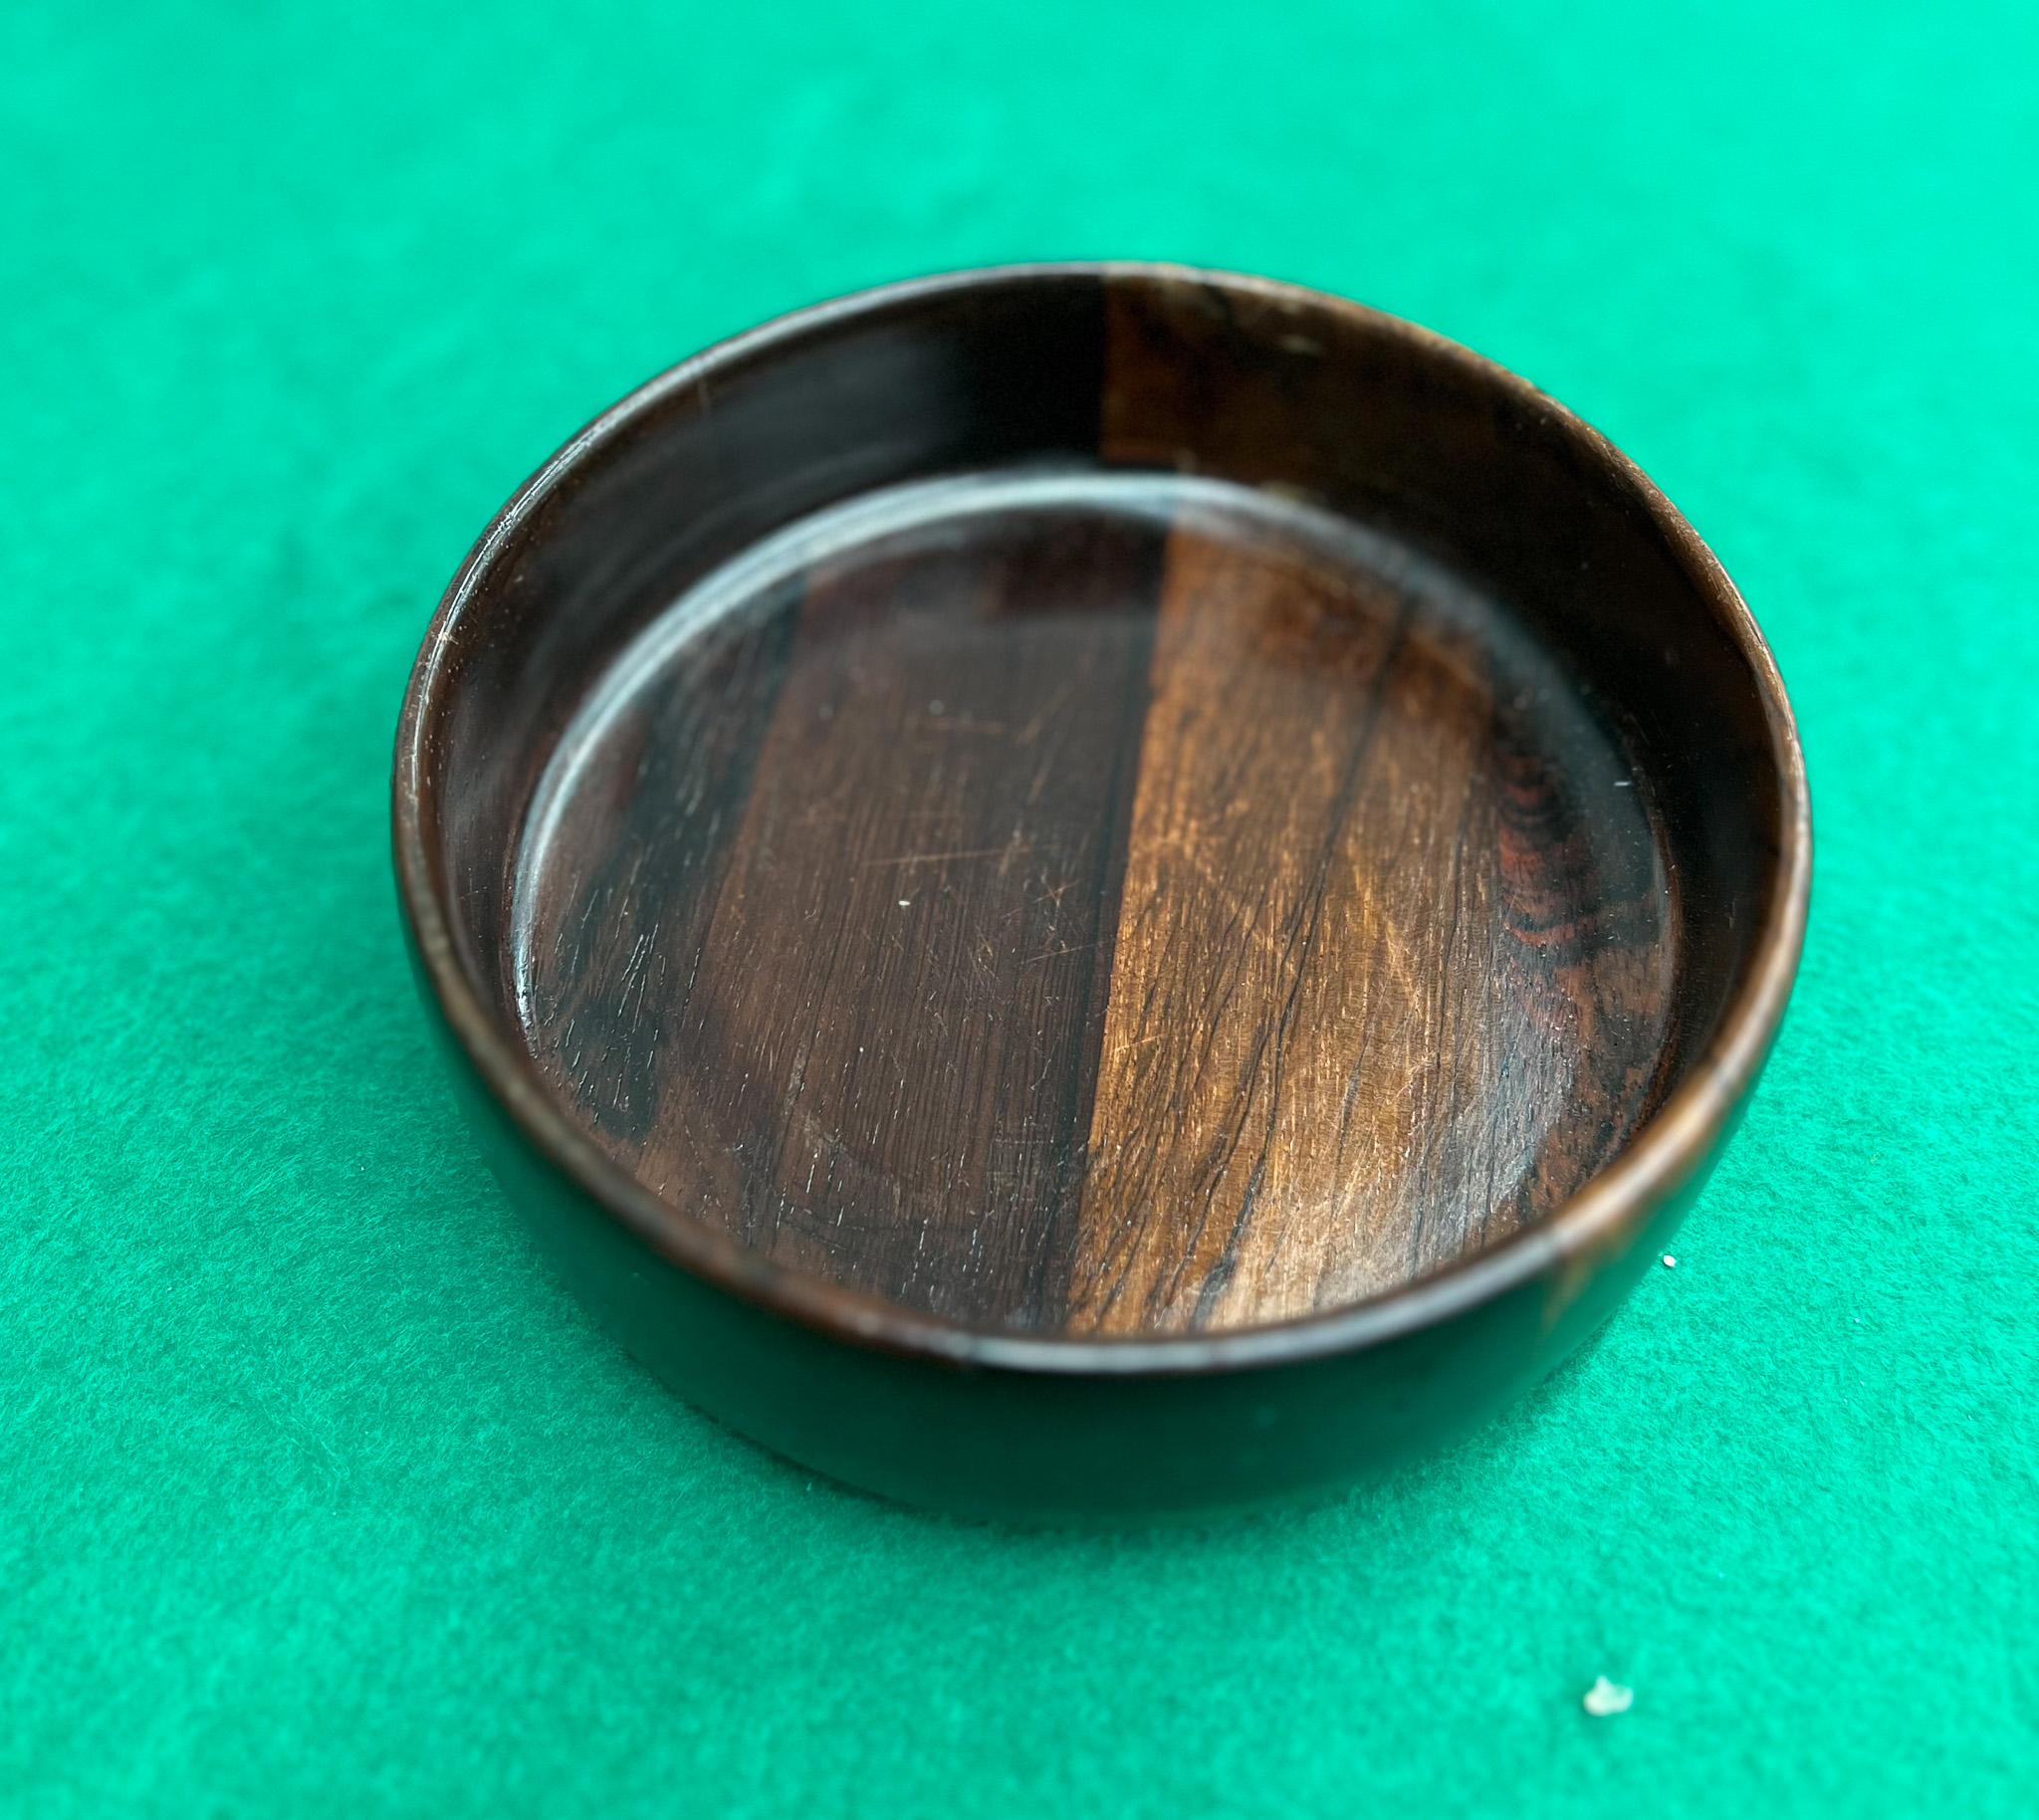 Available today, this Brazilian Mid-Century Modern bowl, designed by Tropic Art, is absolutely stunning! Handcrafted with hard rosewood (also known as jacaranda), this bowl has a deep, dark, and rich tone with a stunning natural wood grain. In